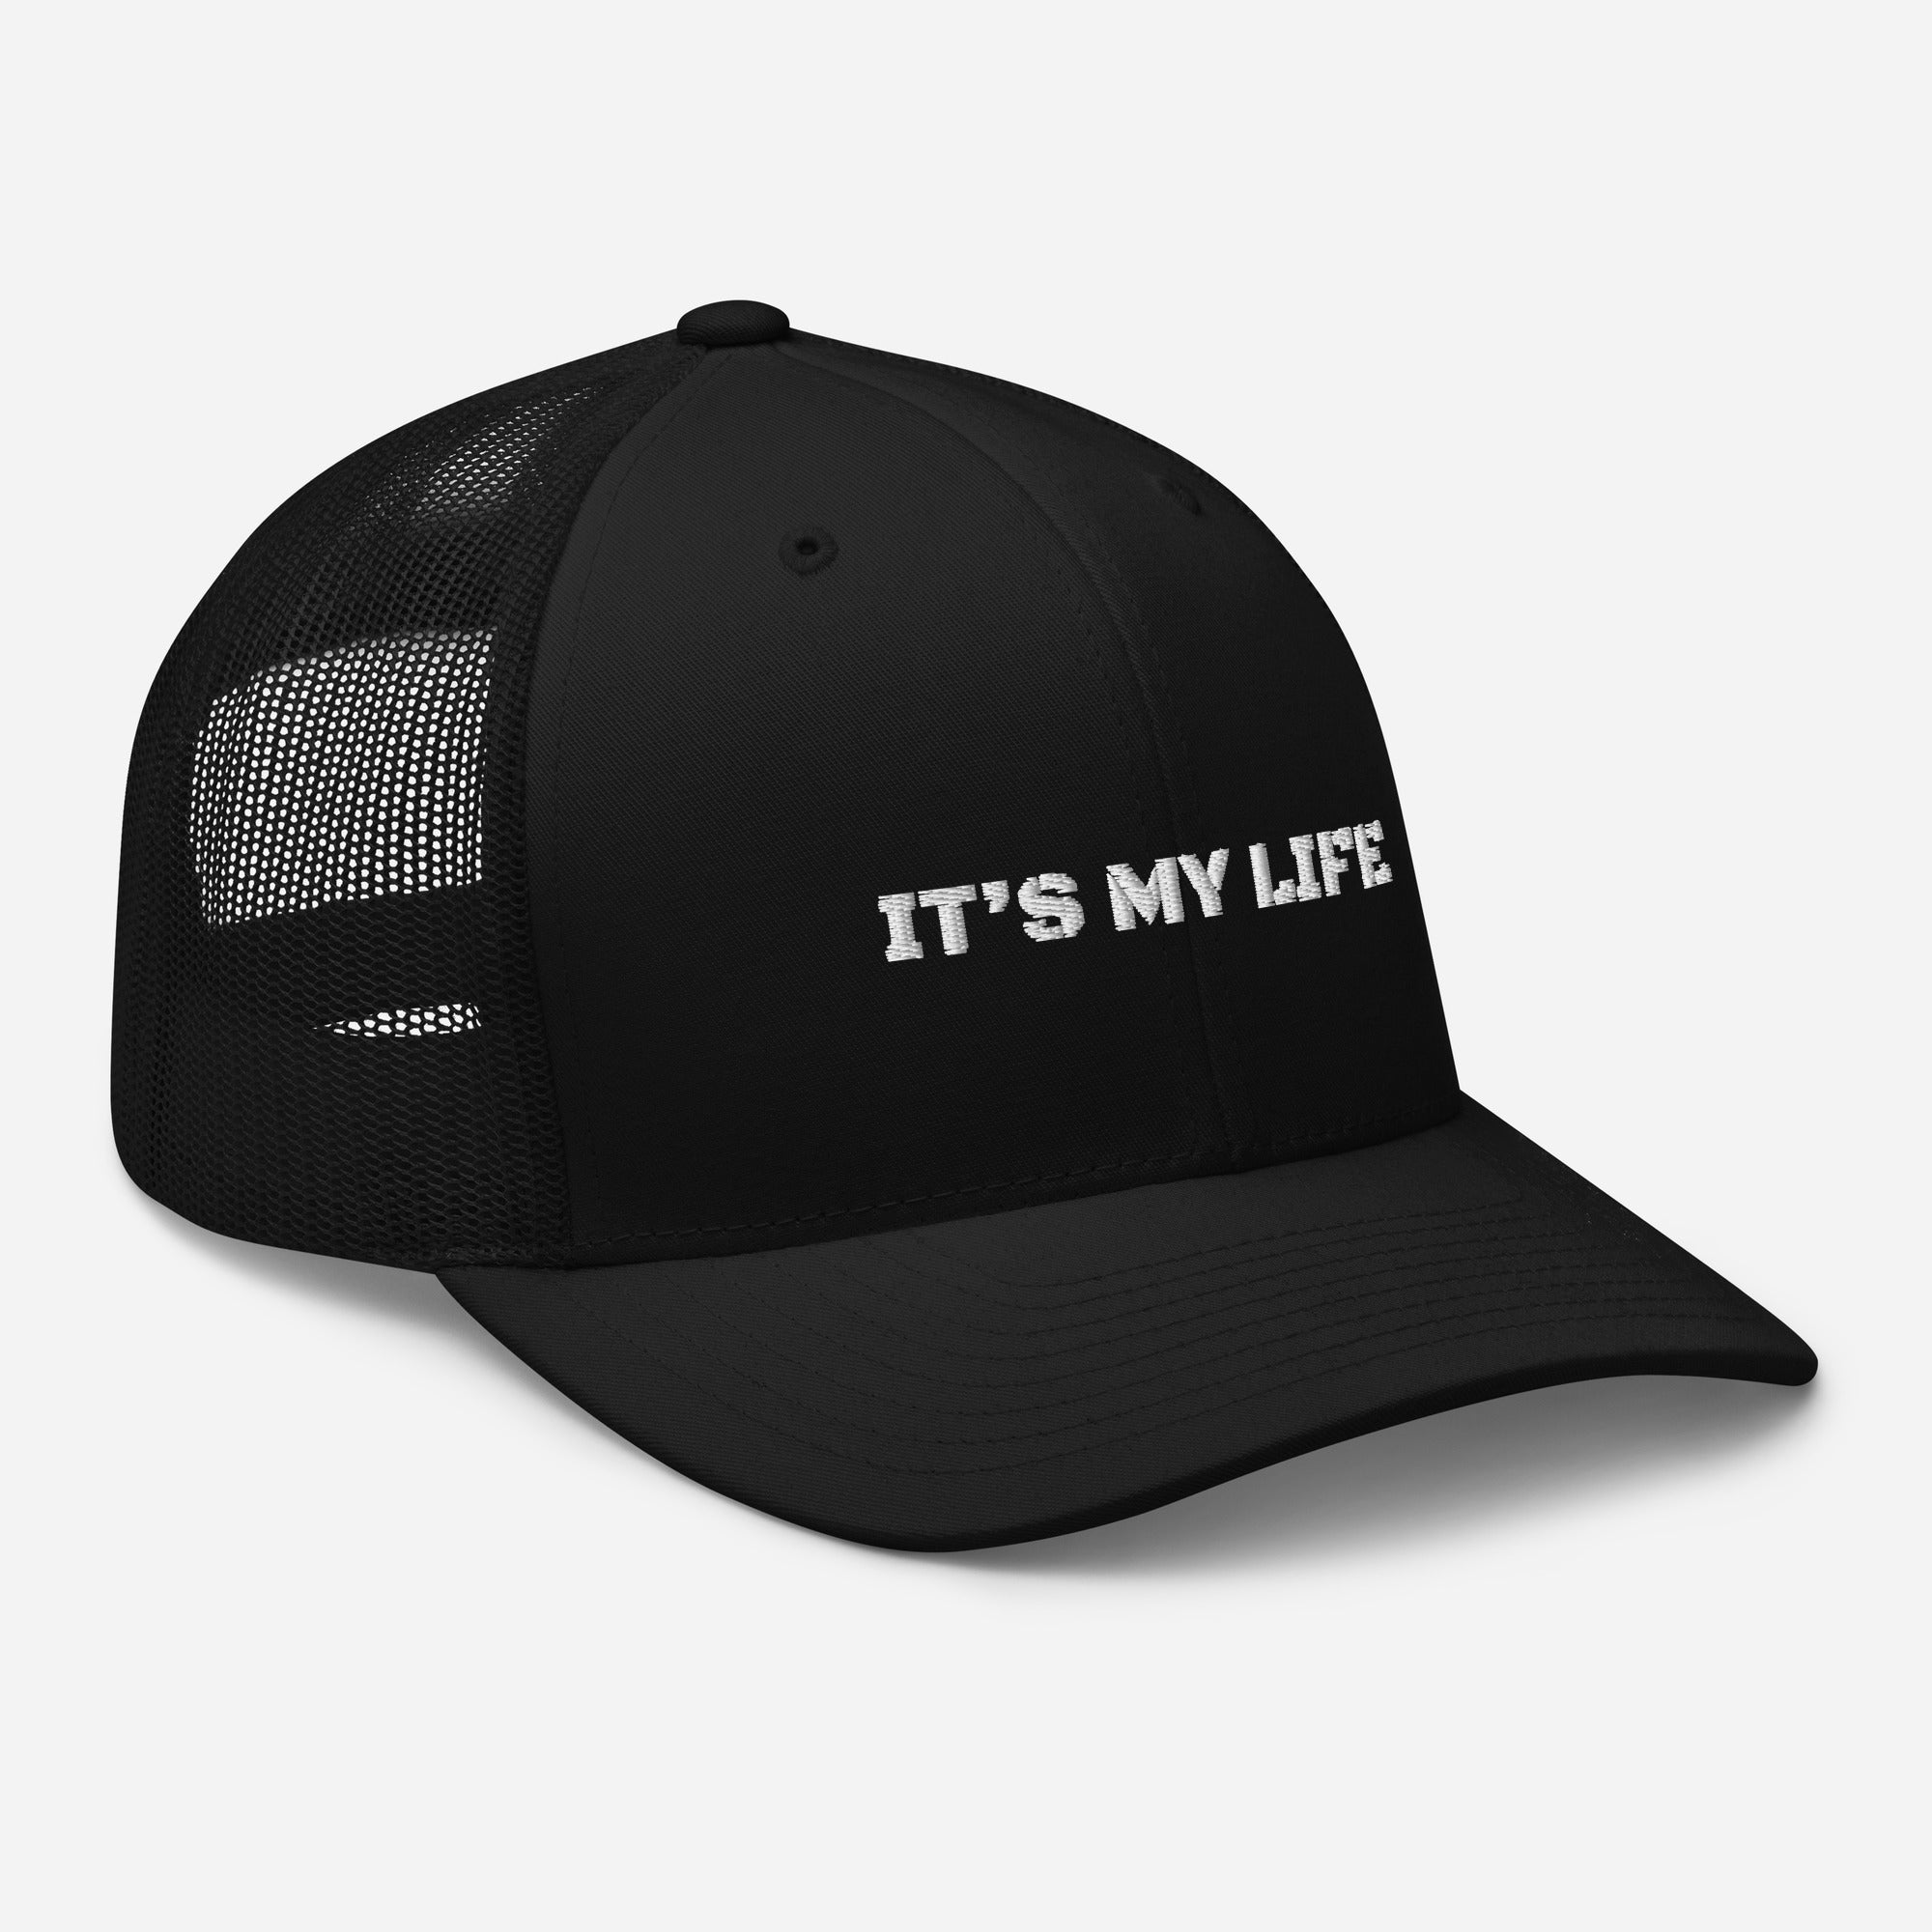 Casquette Trucker MB "It's my life" brodé